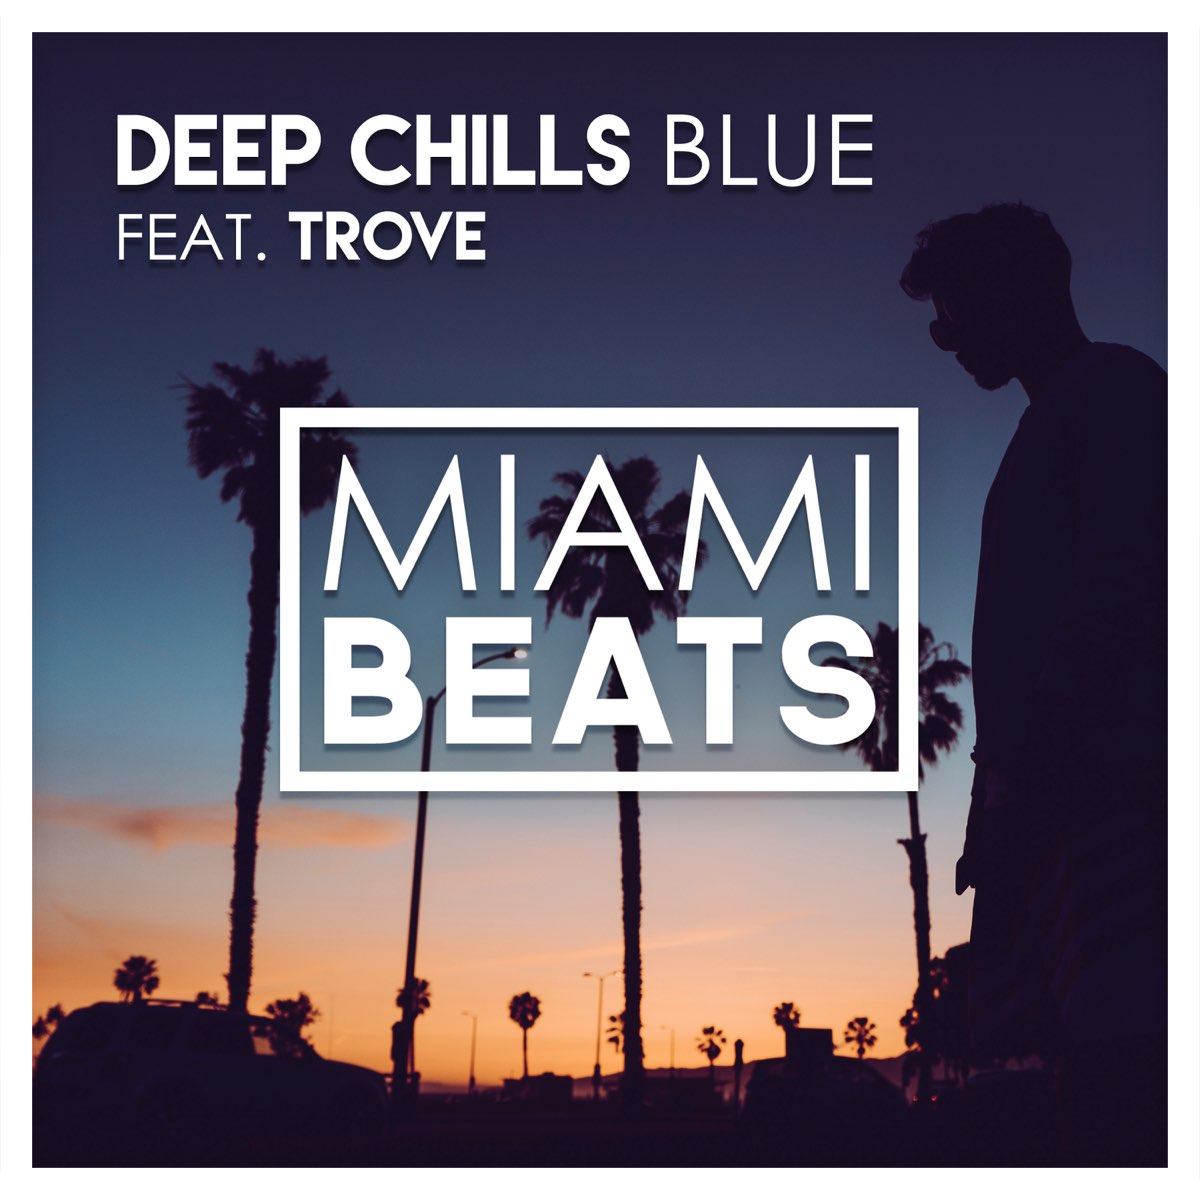 Blue chill. Deep Chill. Miami Beats. Blue featuring. Deep Chills feat. Ivie.